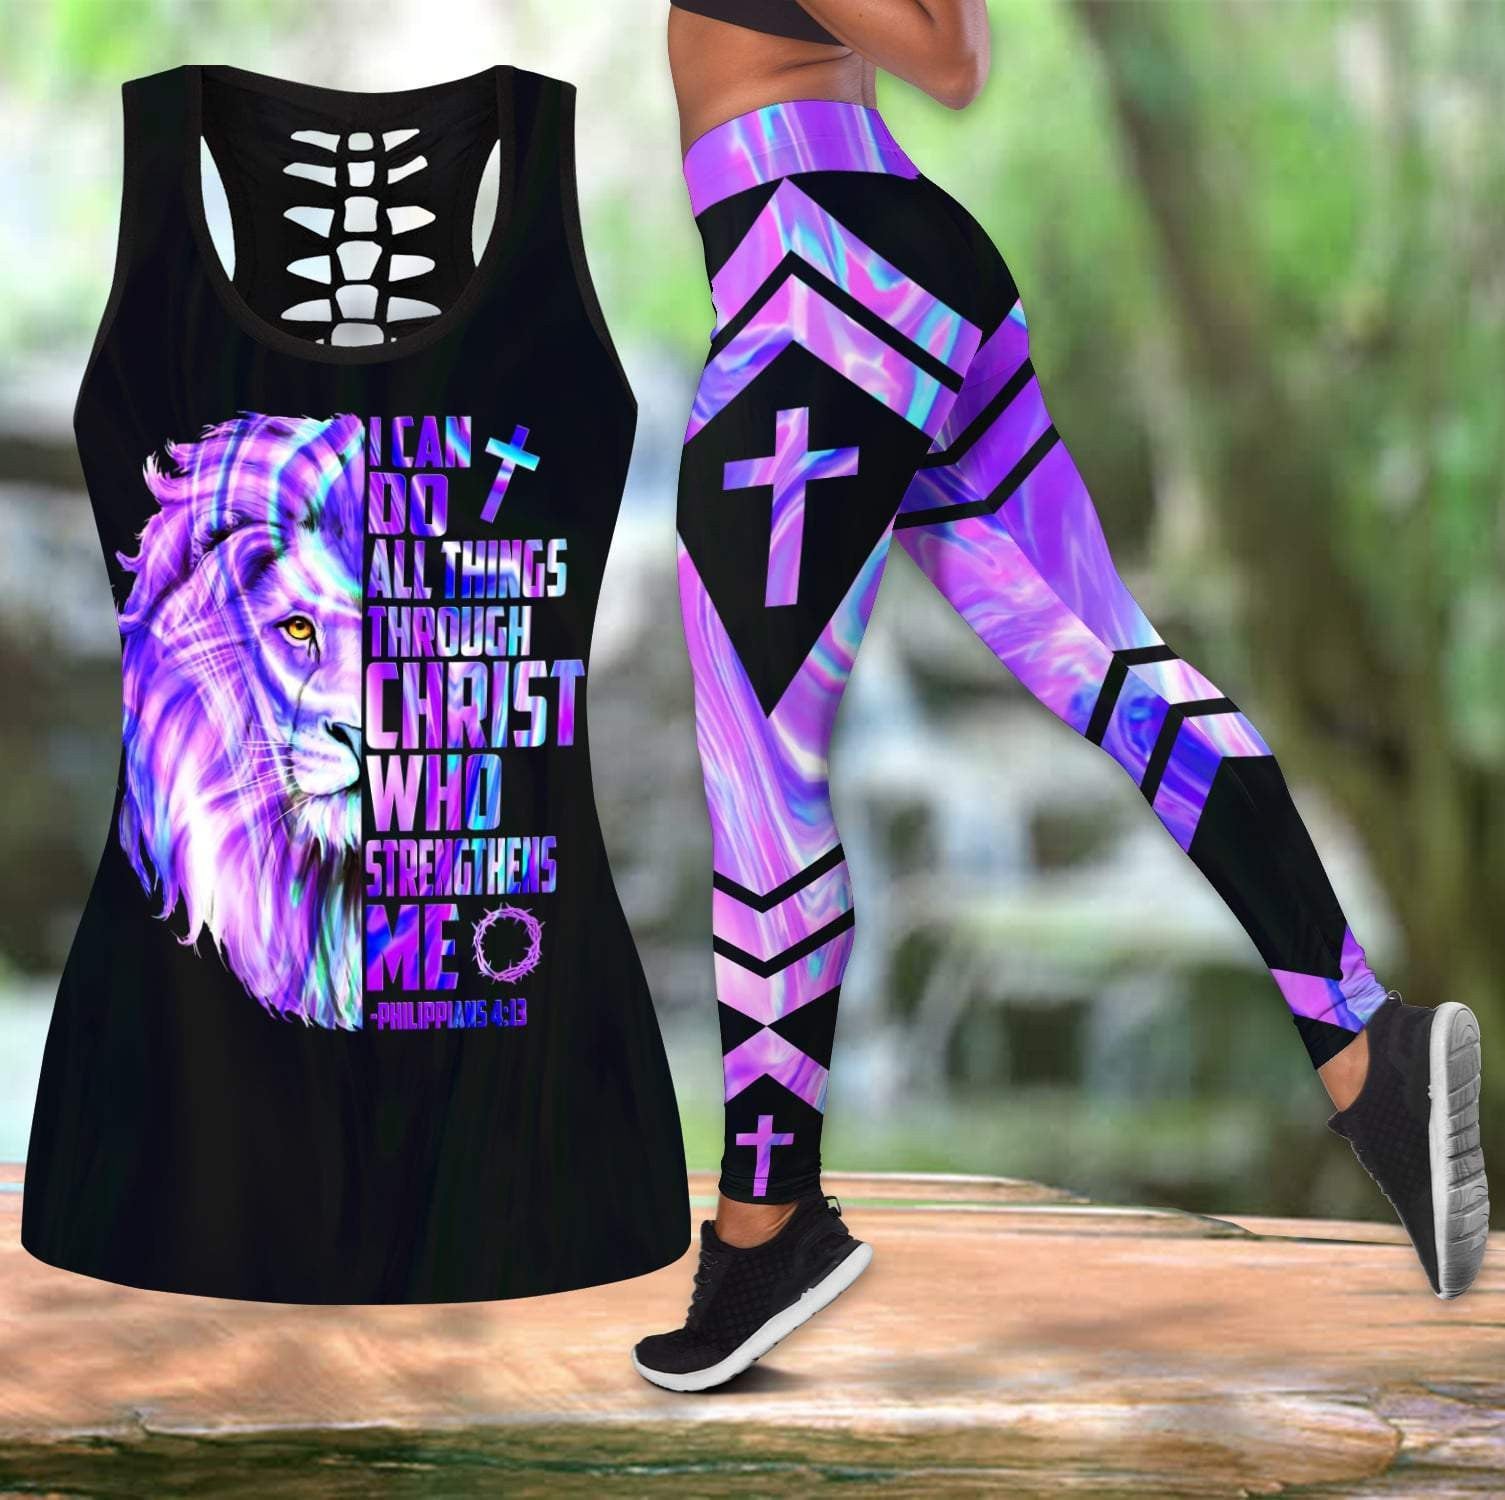 I Can Do All Things Through Christ Who Strengthen Me Jesus - Christian Tank Top And Legging Sets For Women